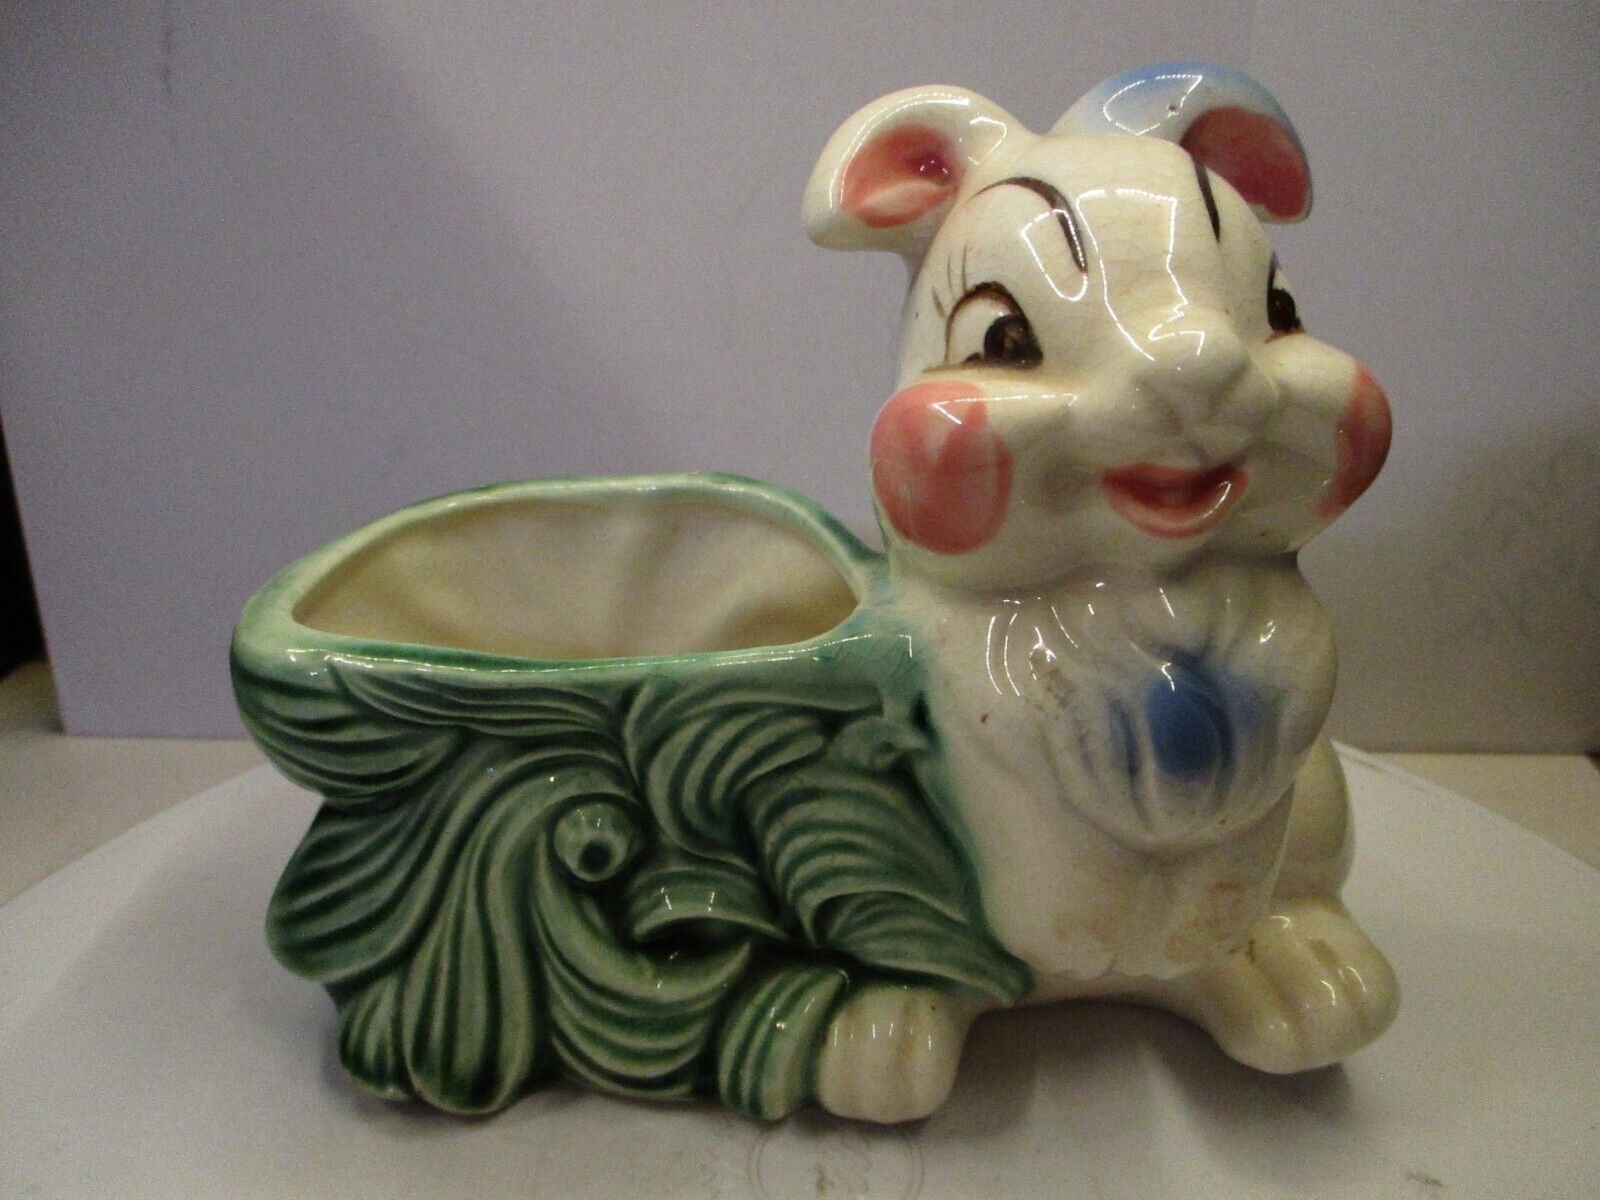 Vtg. Winton Bunny Planter no damage, chips cracks or other unwanted flaws